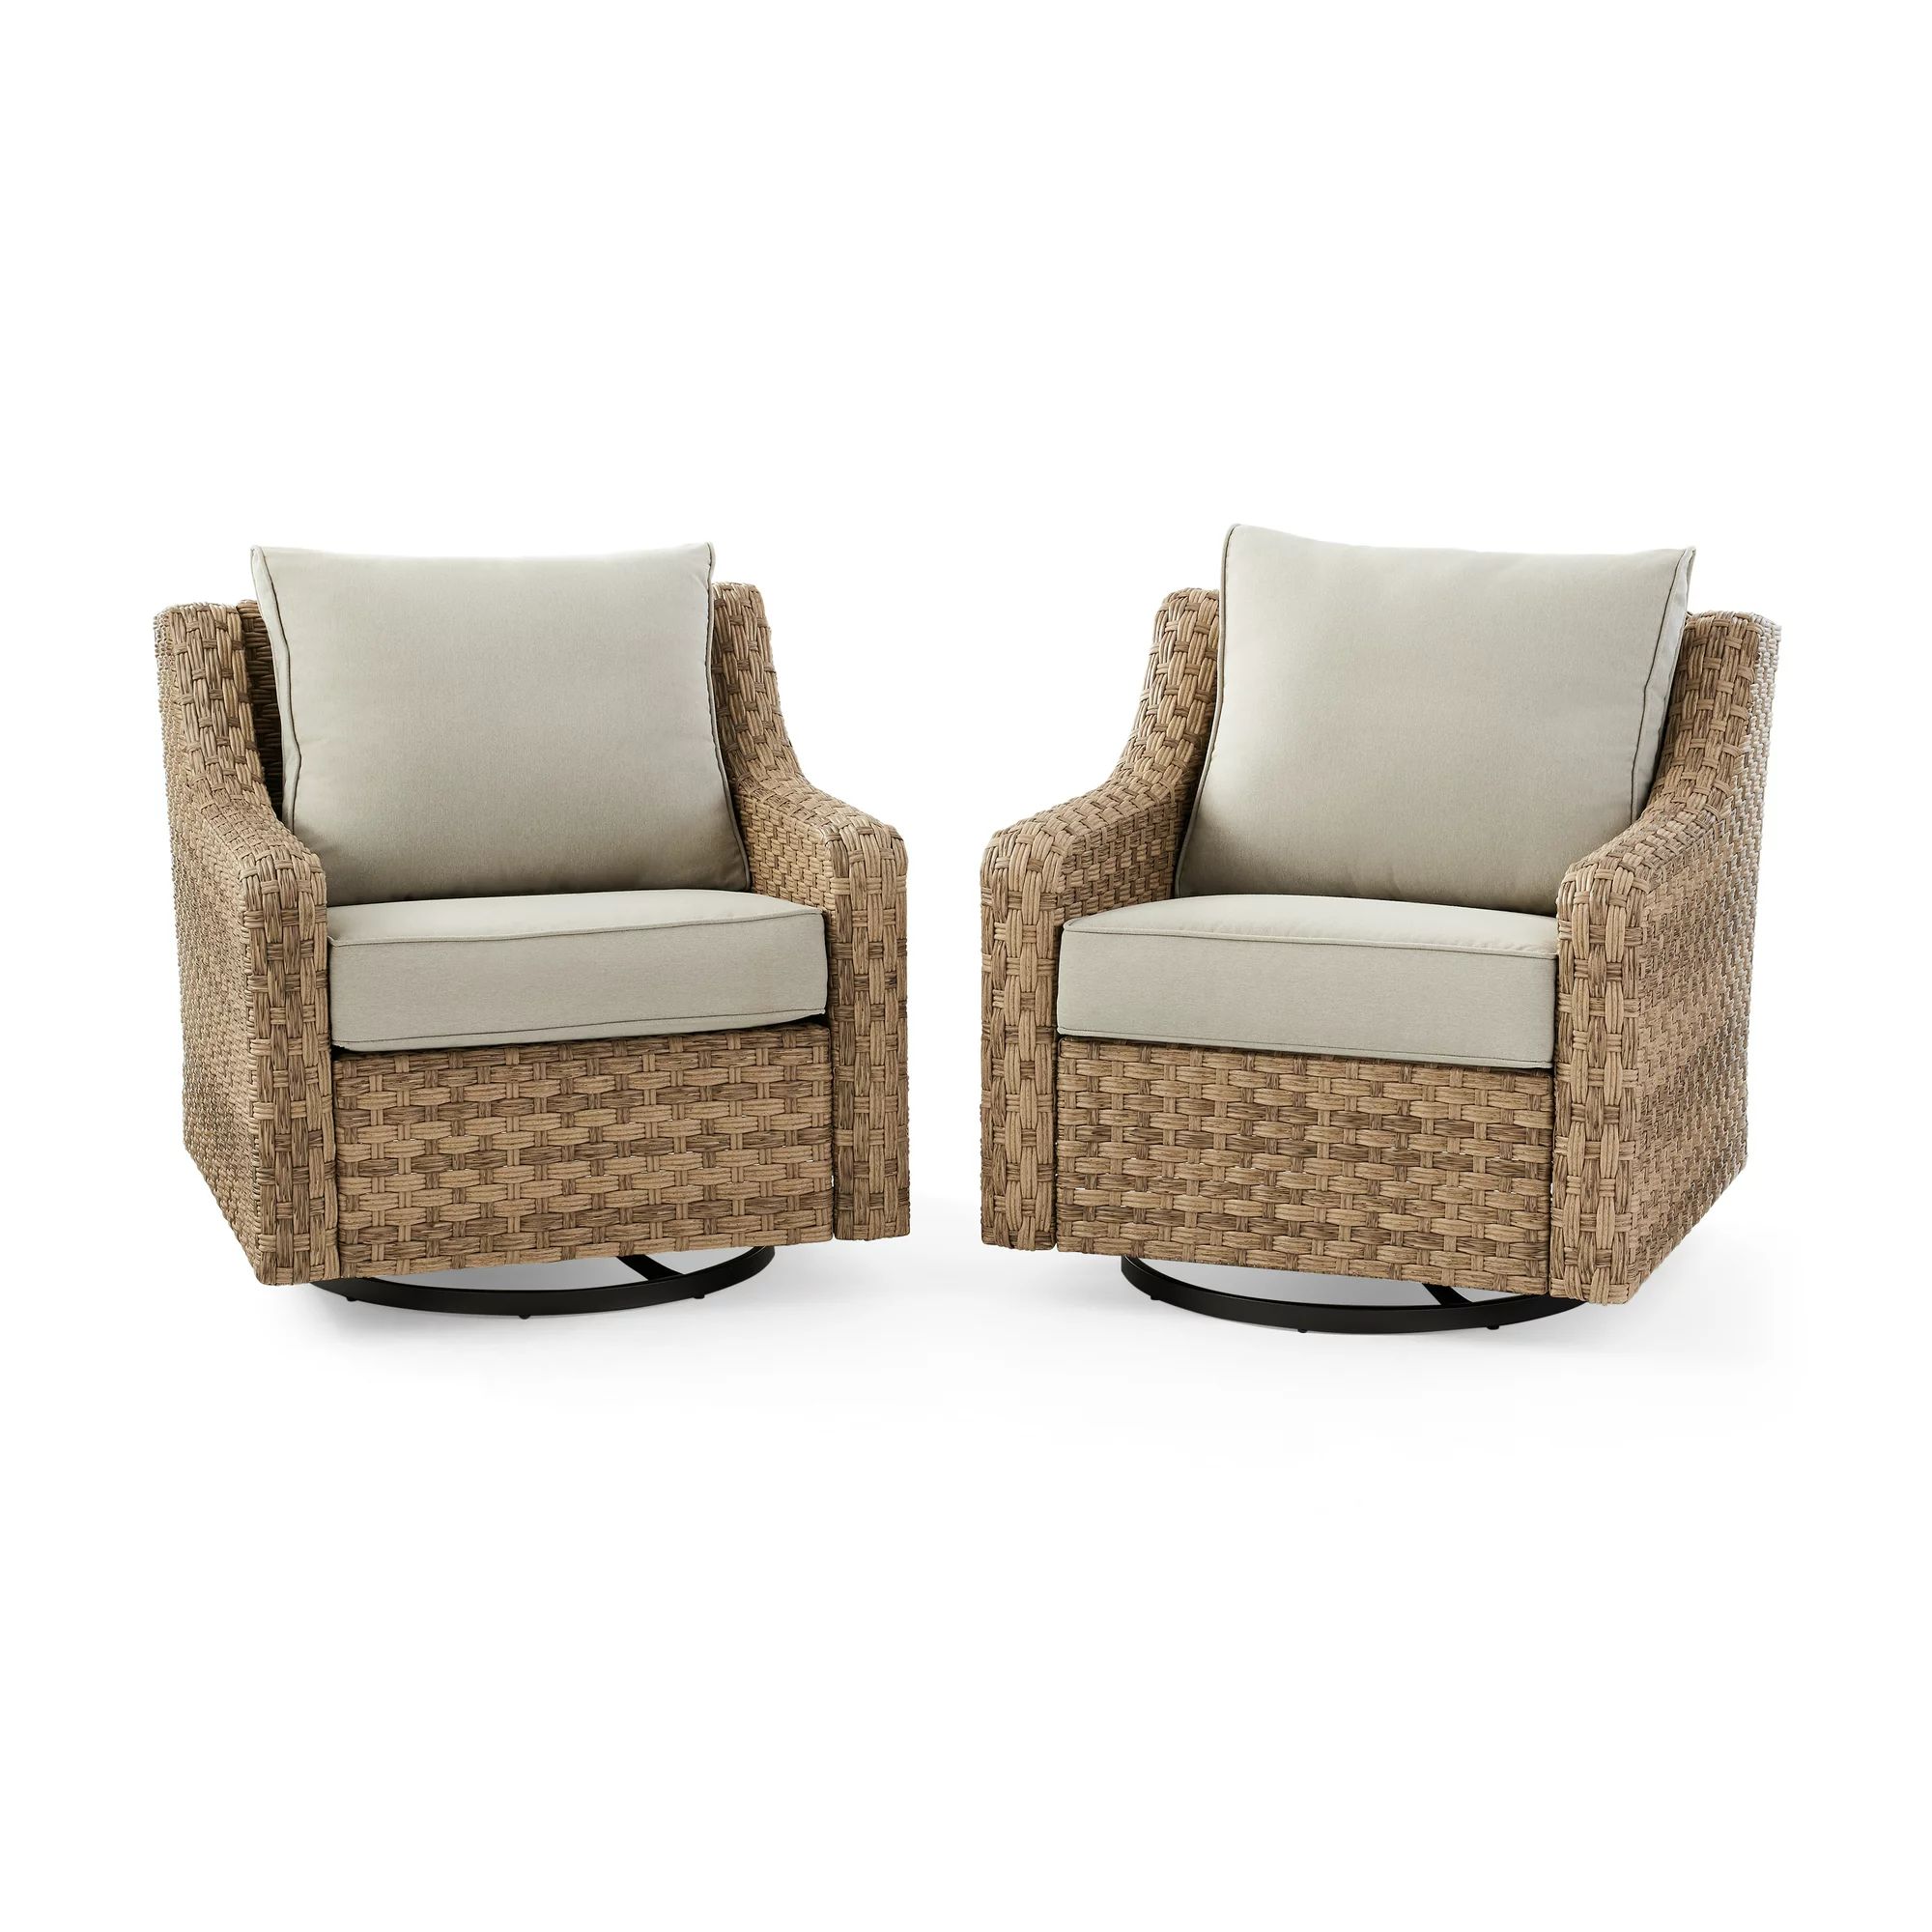 Better Homes & Gardens River Oaks Outdoor Swivel Gliders with Patio Covers, Set of 2, Natural - W... | Walmart (US)